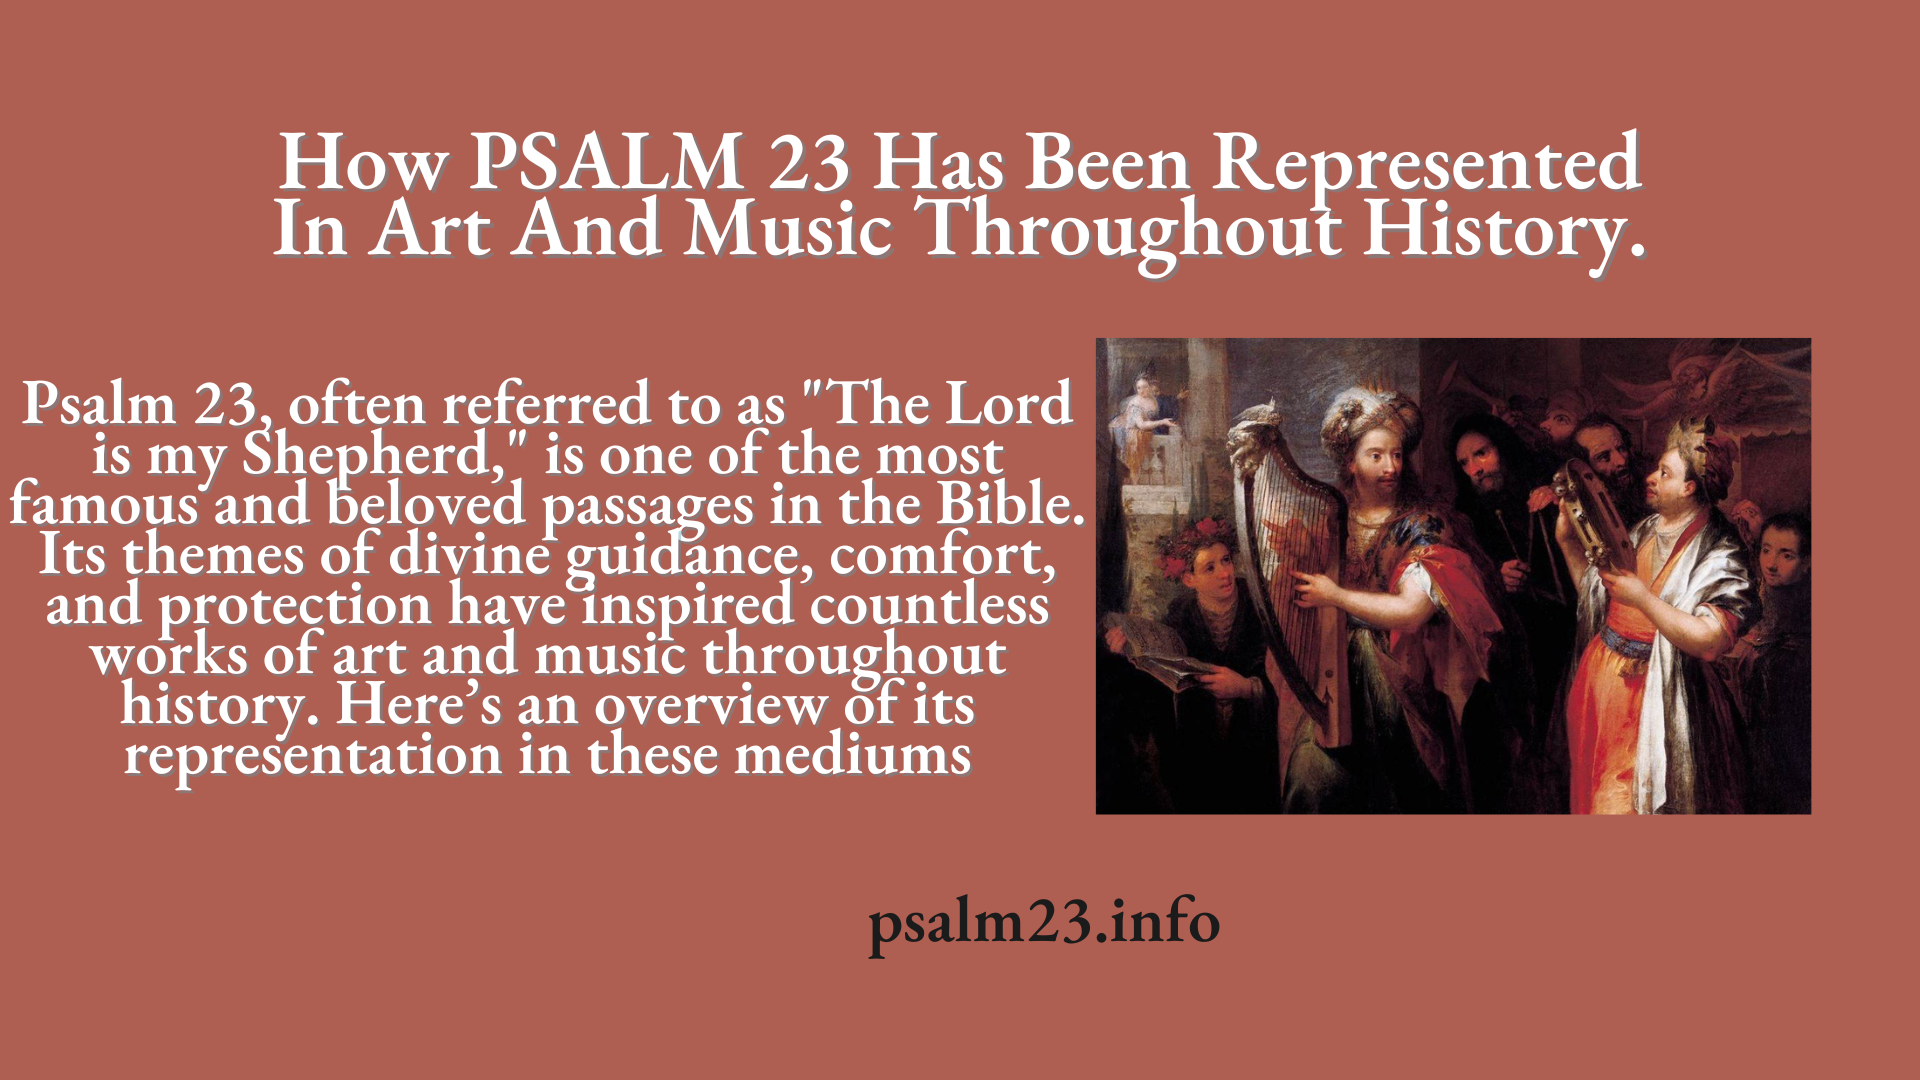 How PSALM 23 Has Been Represented In Art And Music Throughout History.